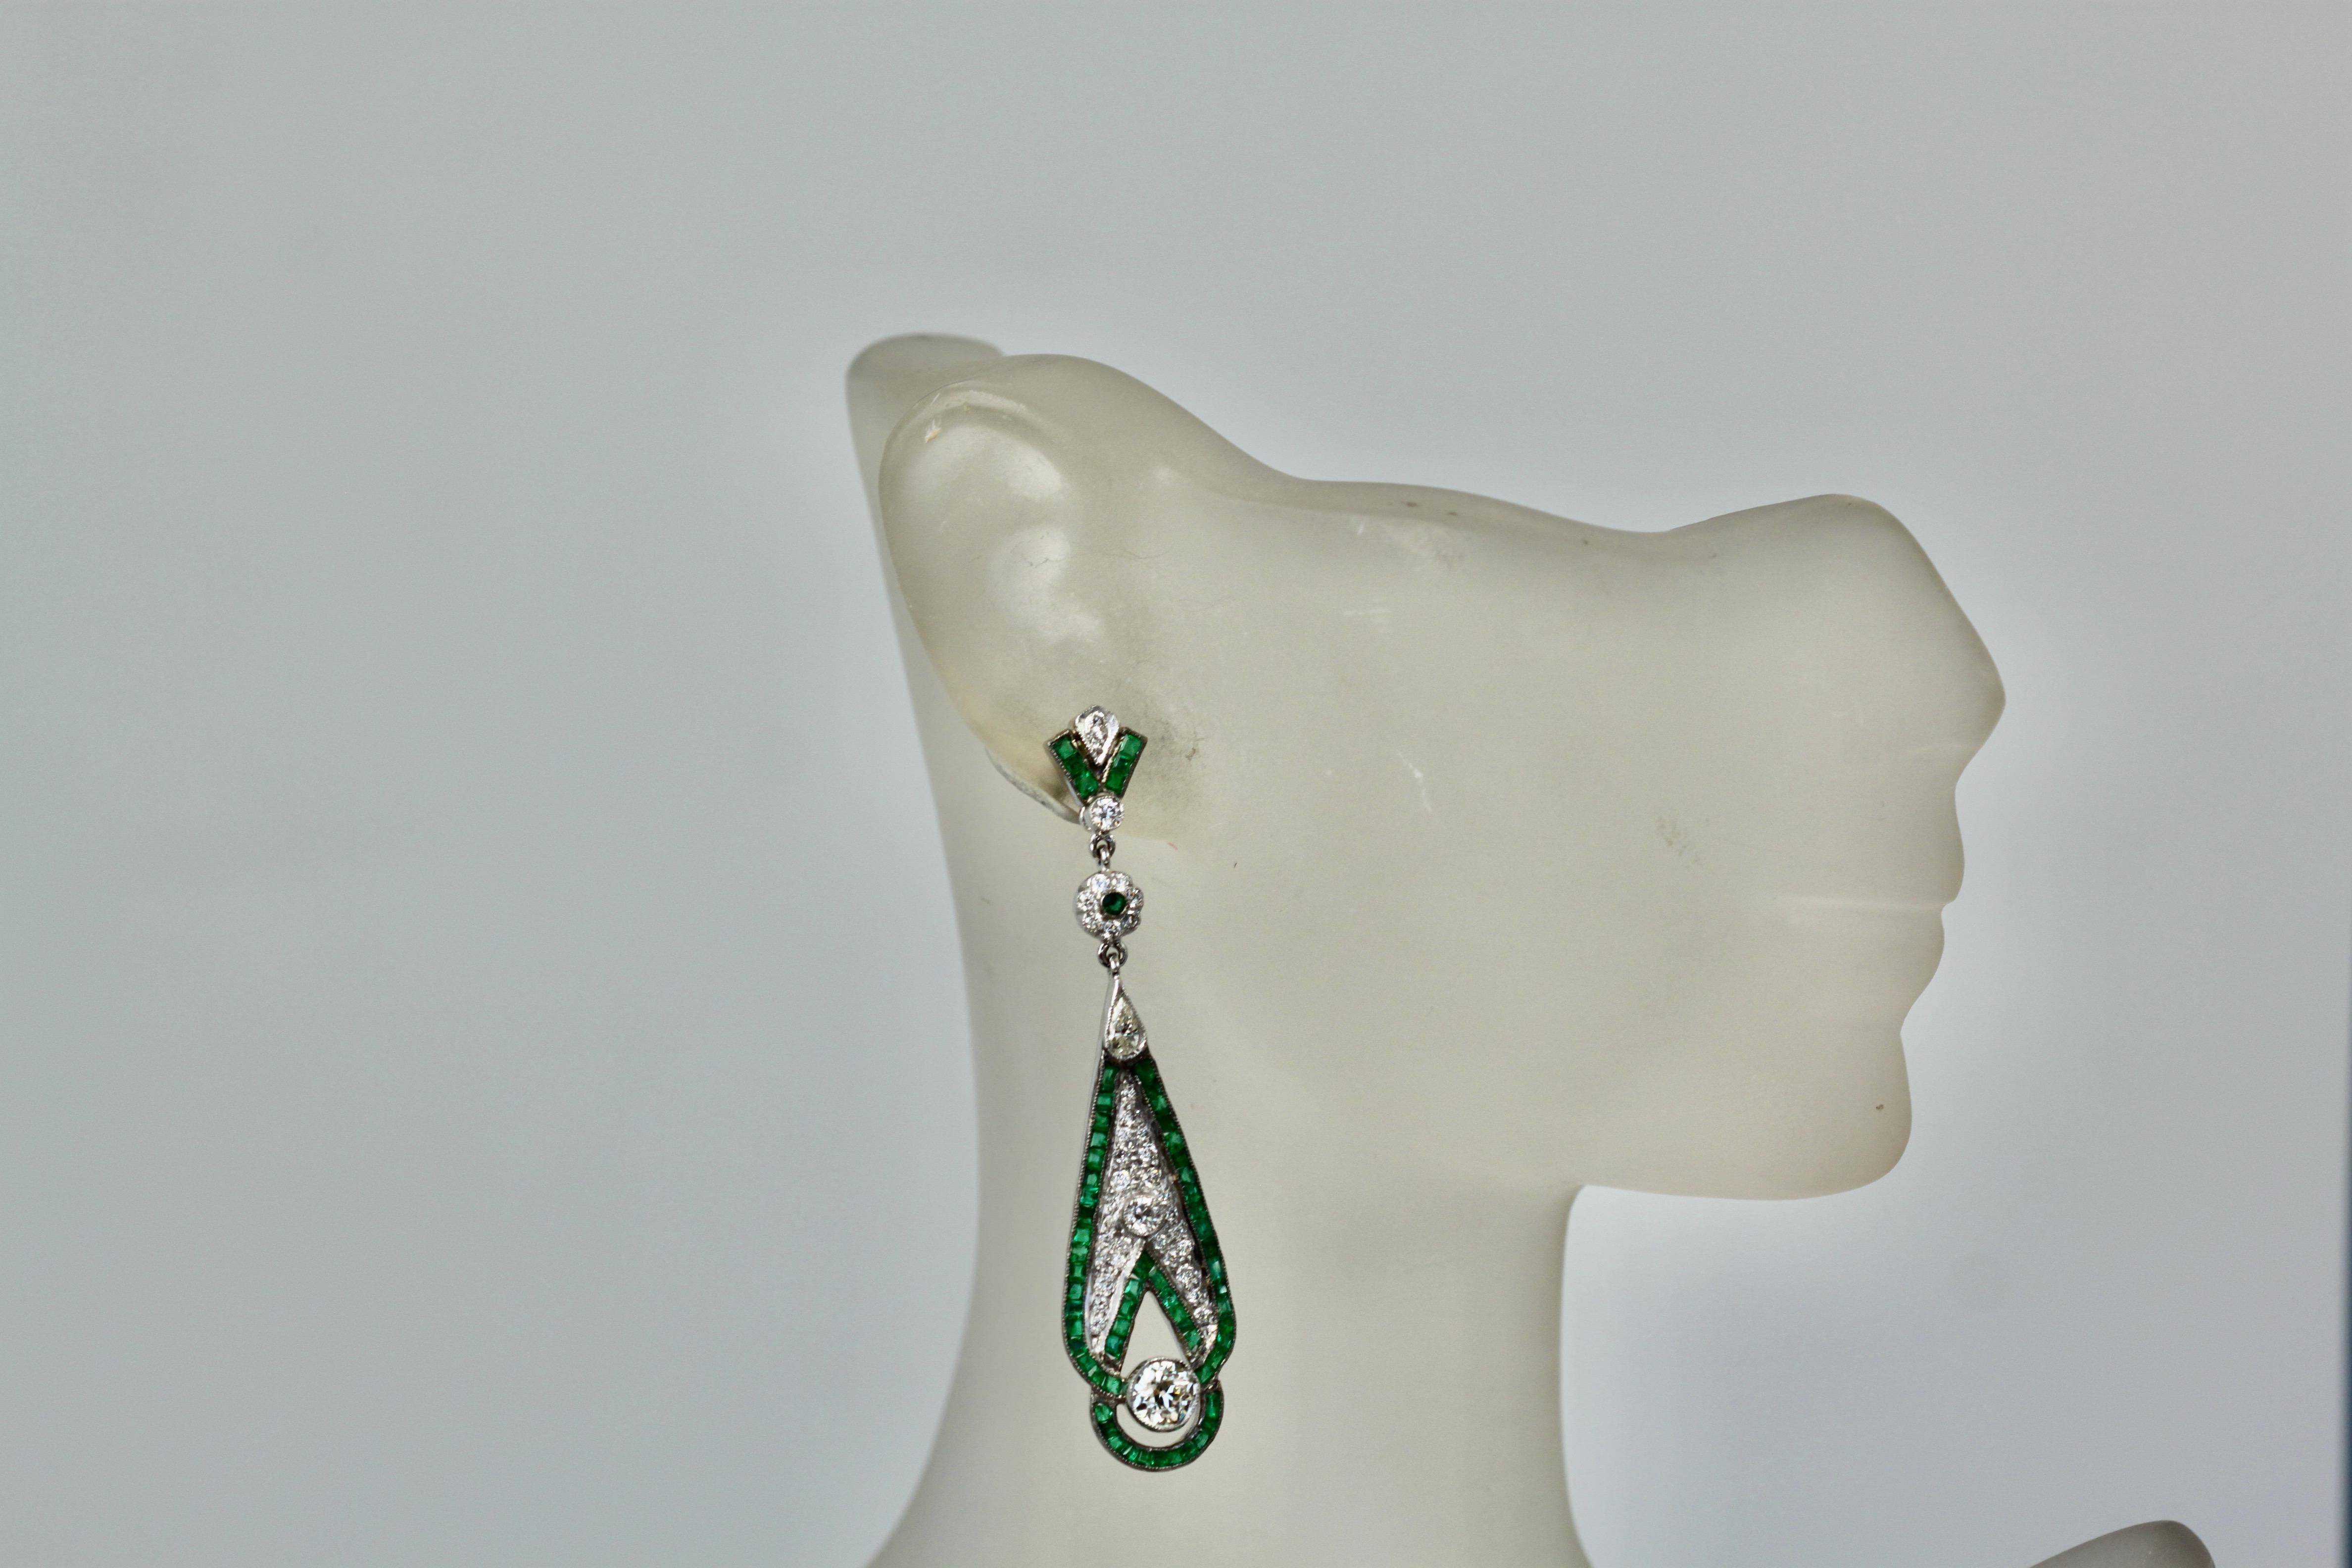 These gorgeous Emerald Diamond Pendant earrings are from France and they are lovely. These pendant earrings weight 13.9 grams and they are 5cm long x 14 mm wide.  The top has 6 baguette Emeralds, 2 small Diamonds, a Diamond flower with Emerald